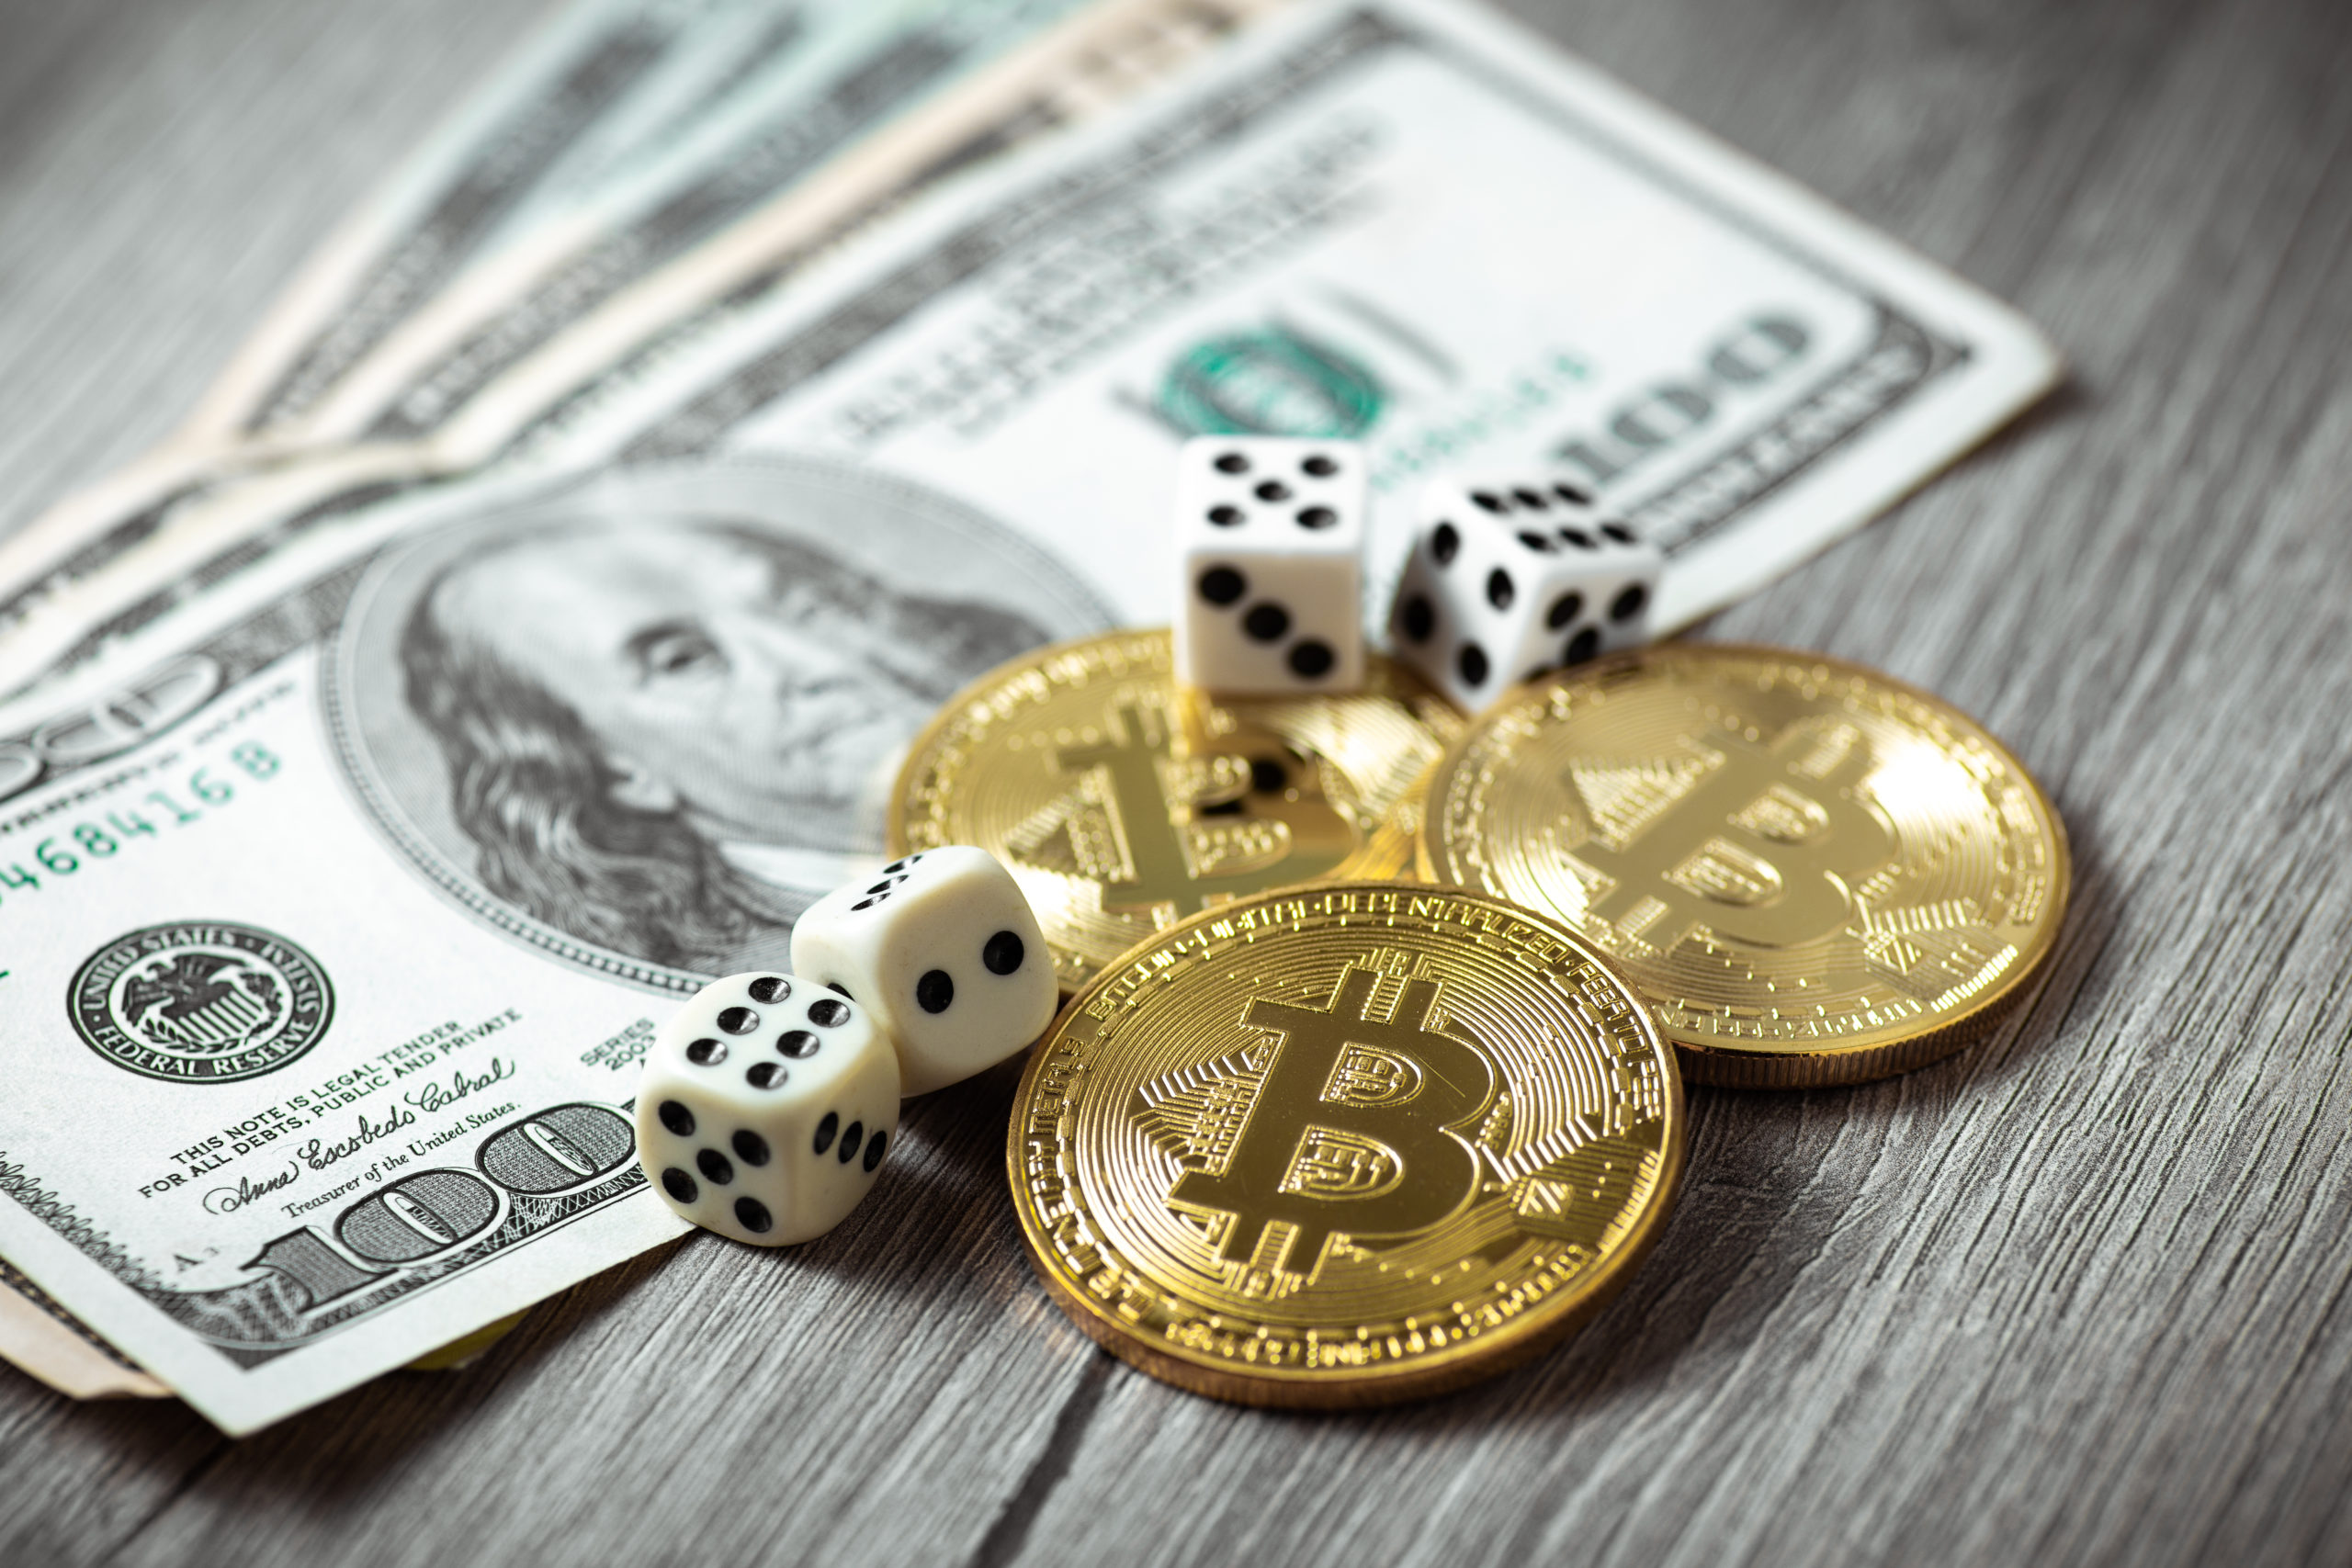 How To Find The Time To new bitcoin casino On Facebook